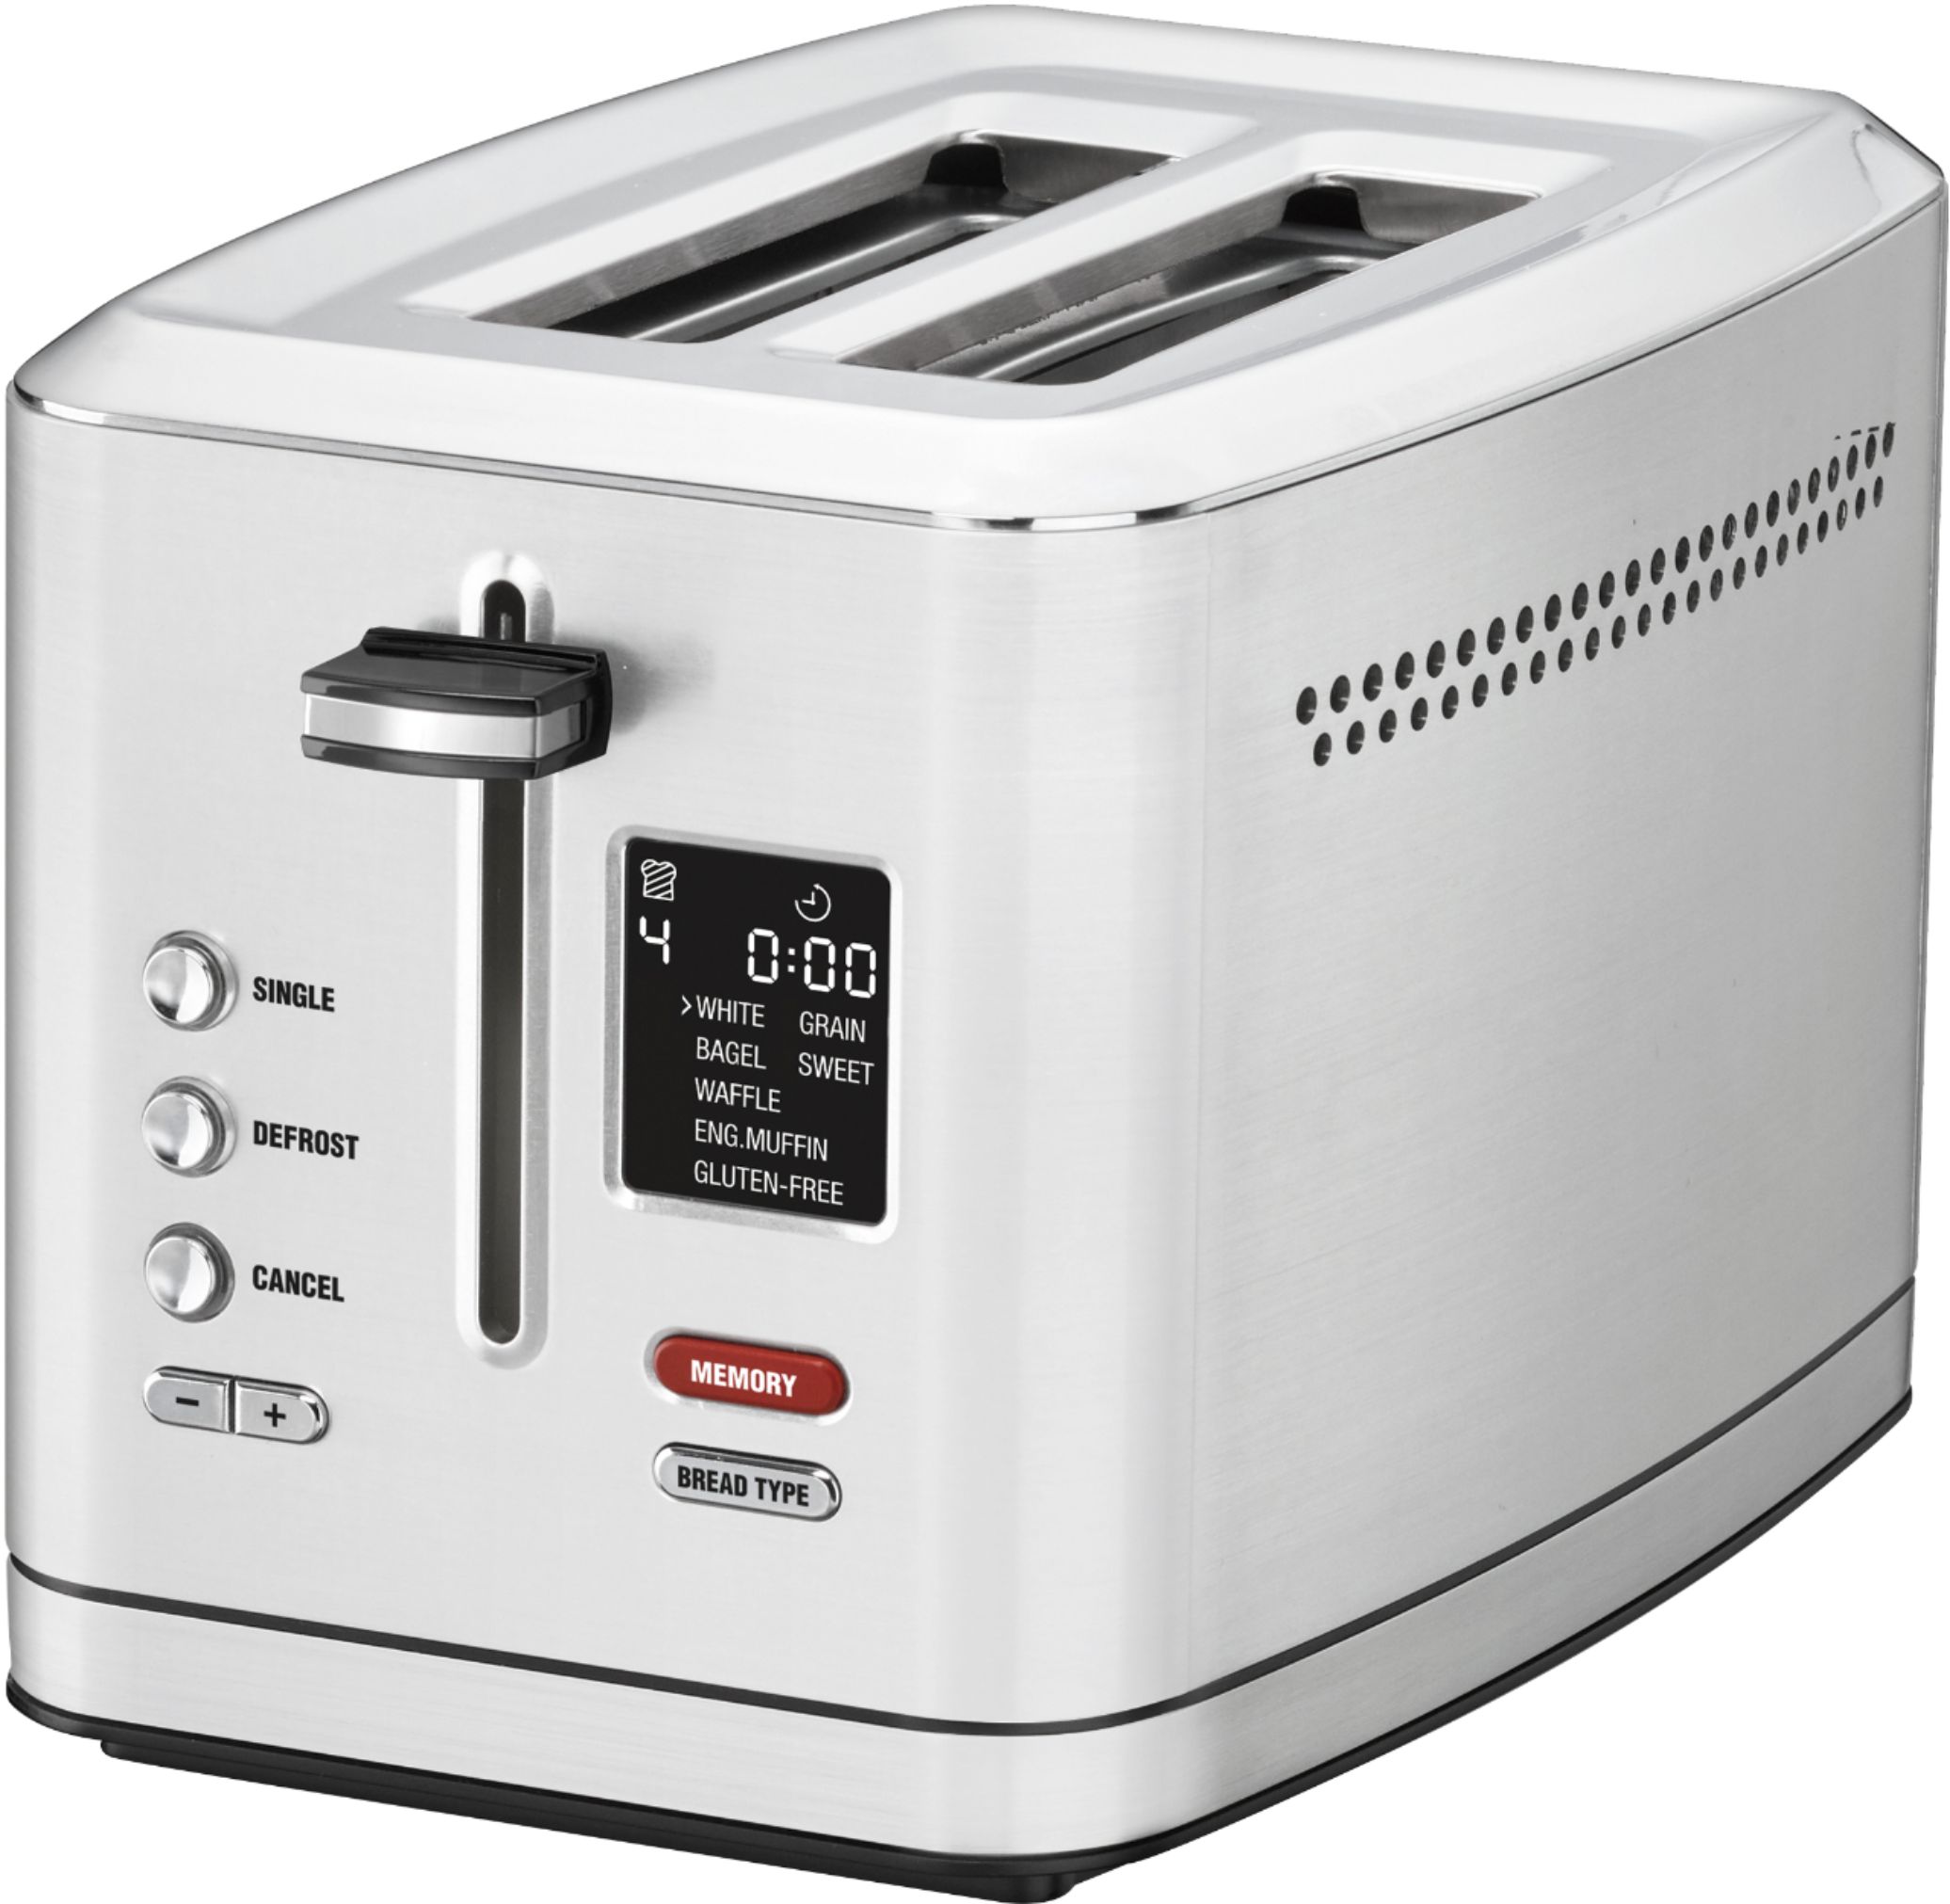 Cuisinart The Bakery 2-Slice Wide-Slot Toaster Stainless Steel CPT-2400P1 -  Best Buy